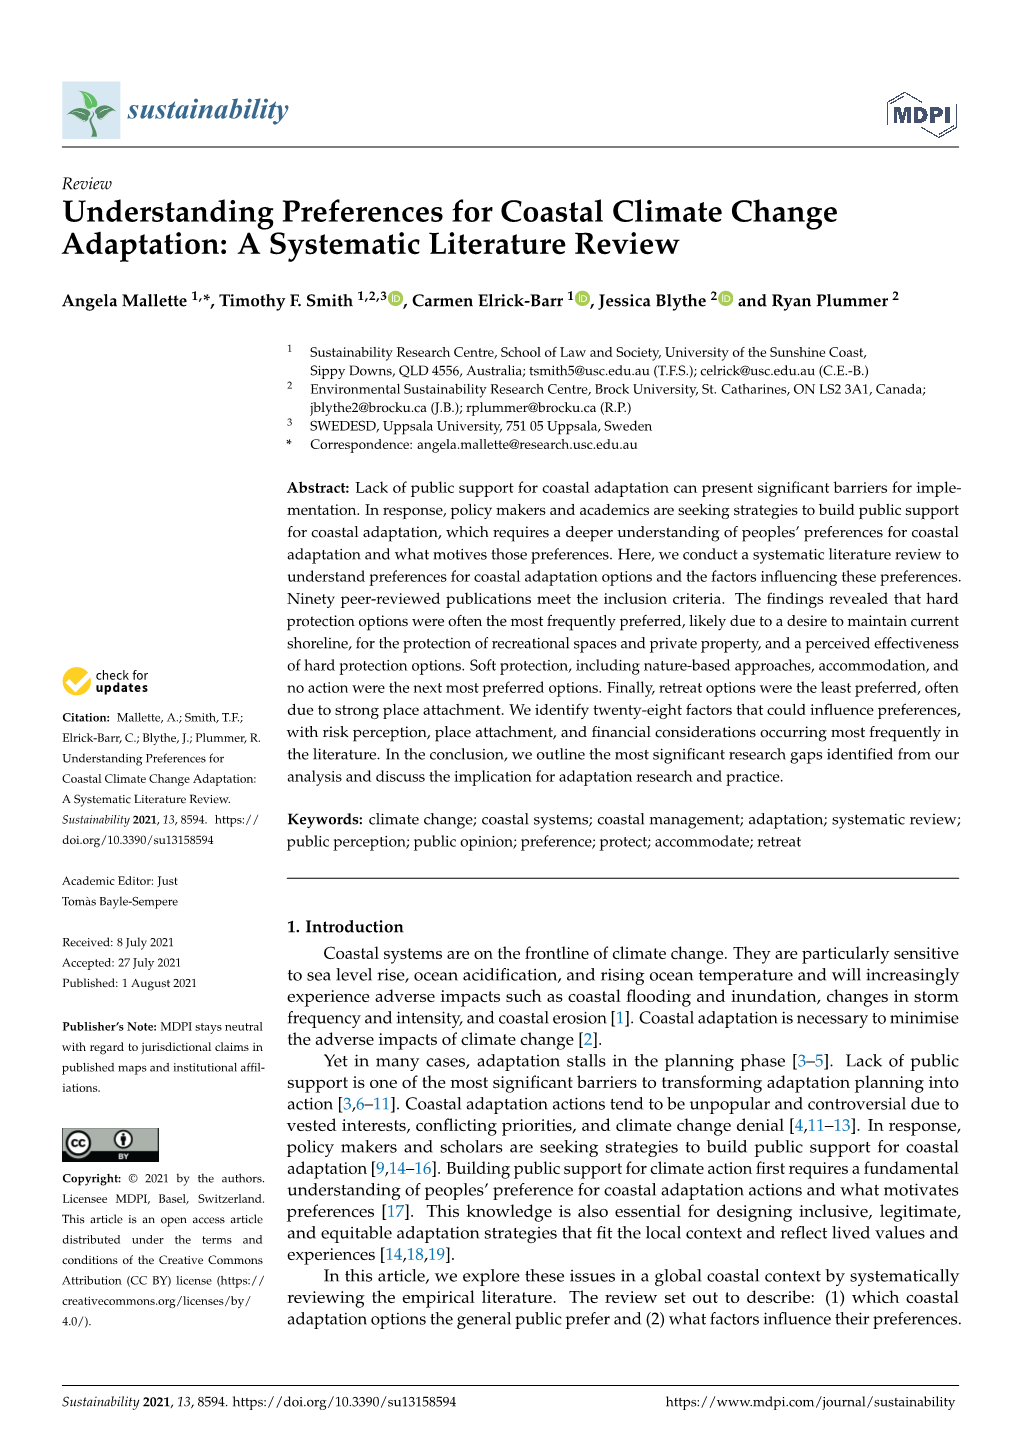 Understanding Preferences for Coastal Climate Change Adaptation: a Systematic Literature Review